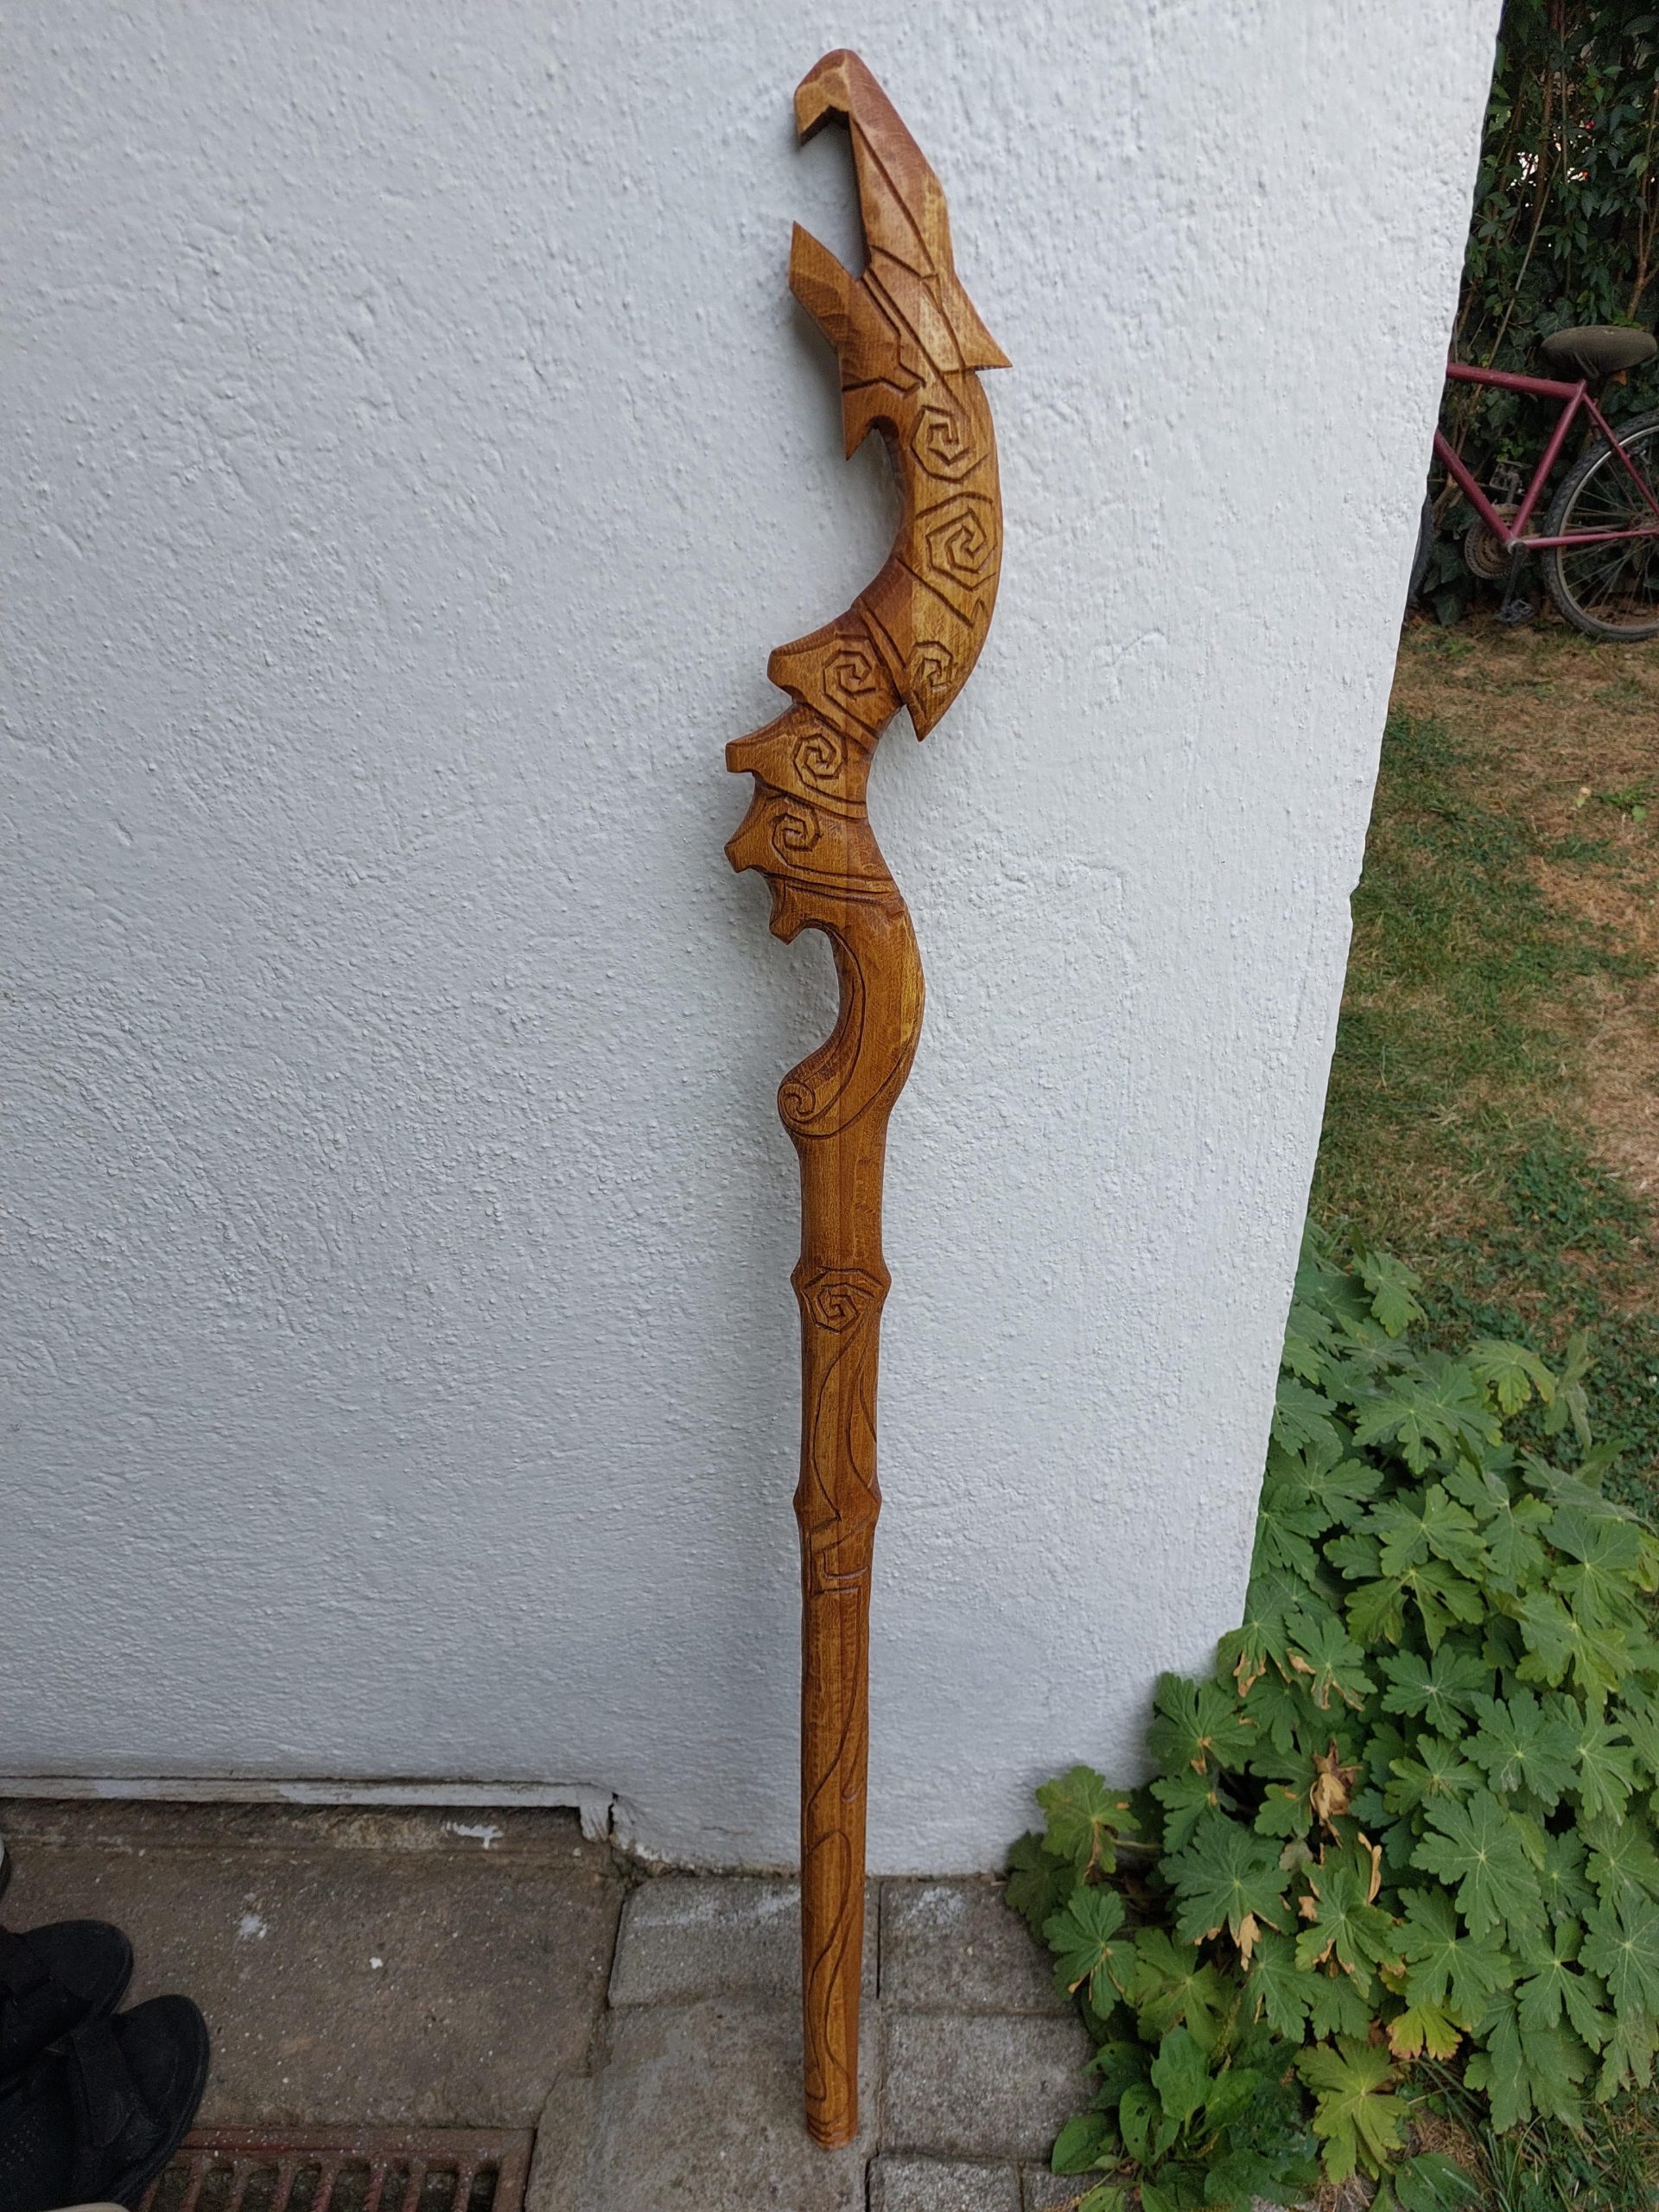 Skyrim Dragon Priest Workers I crafted out of wooden